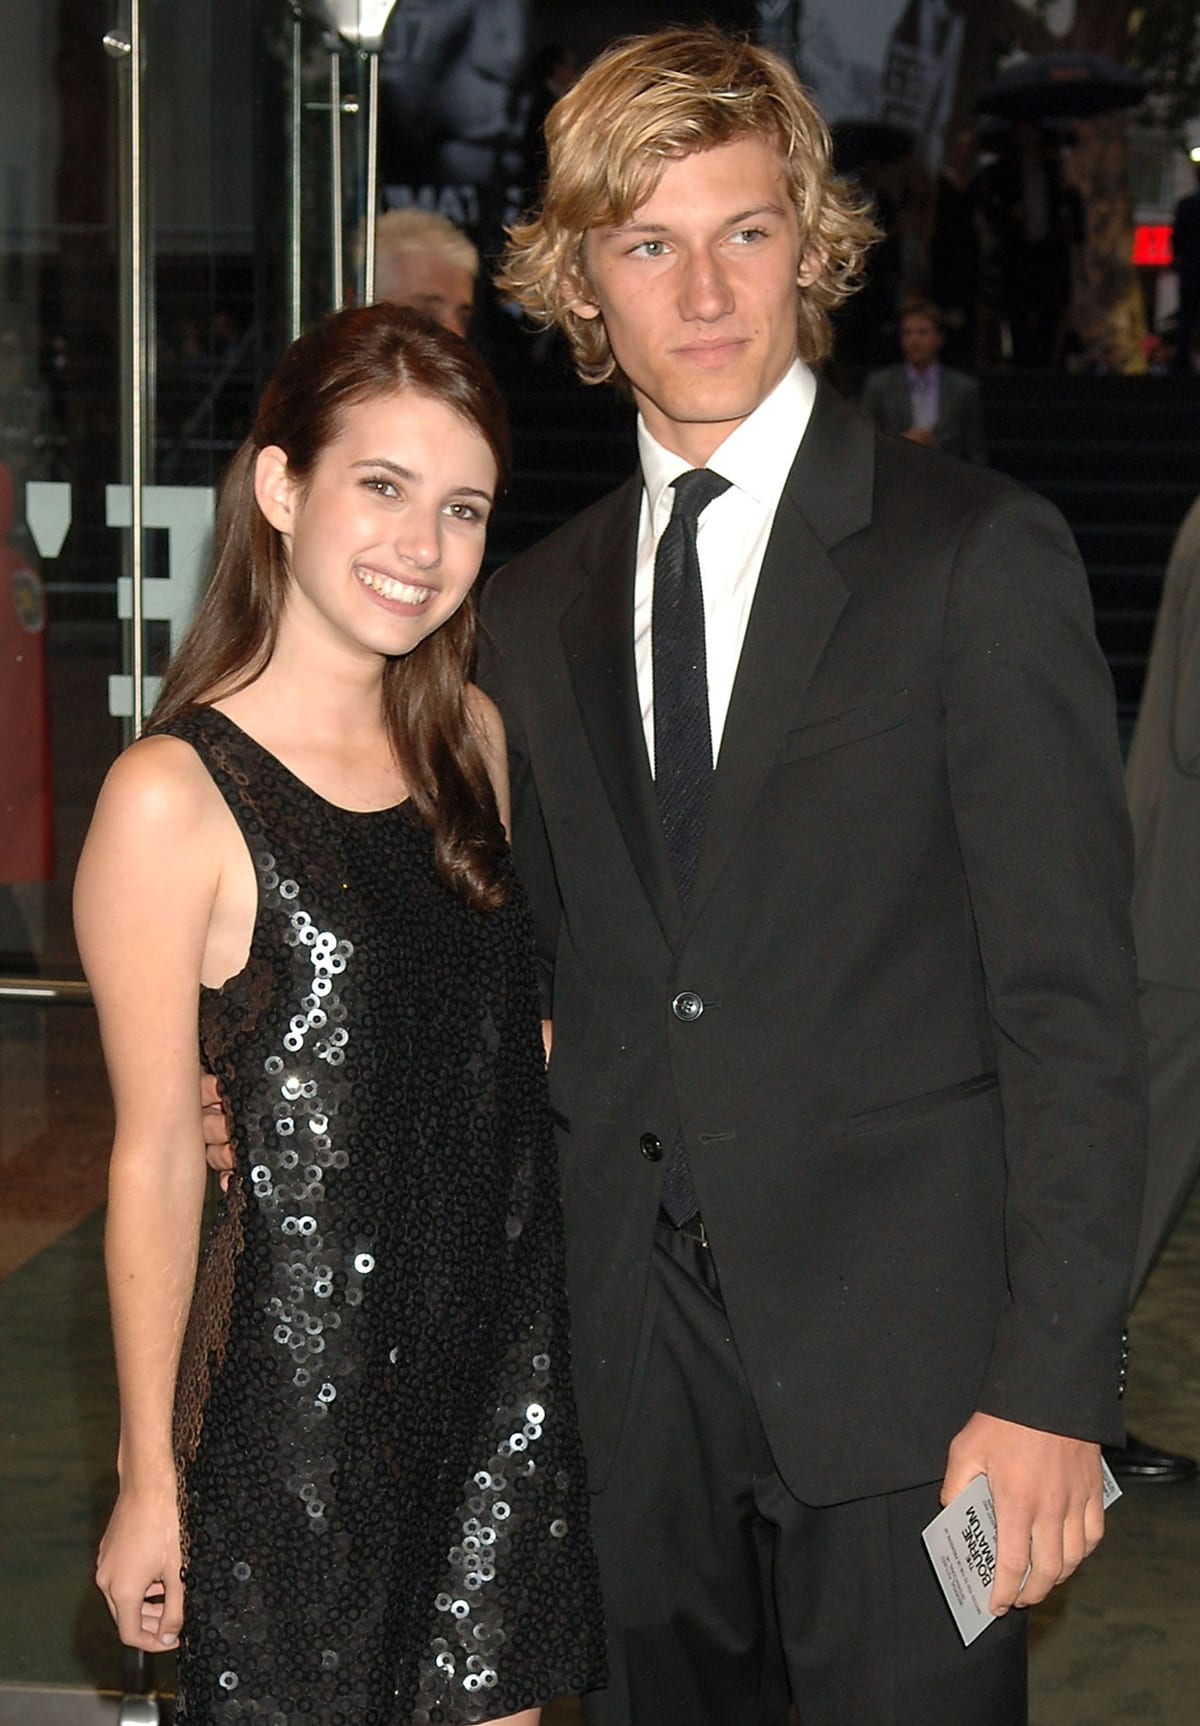 Emma Roberts and Alex Pettyfer met in June 2007 on the set of Wild Child and dated for about a year